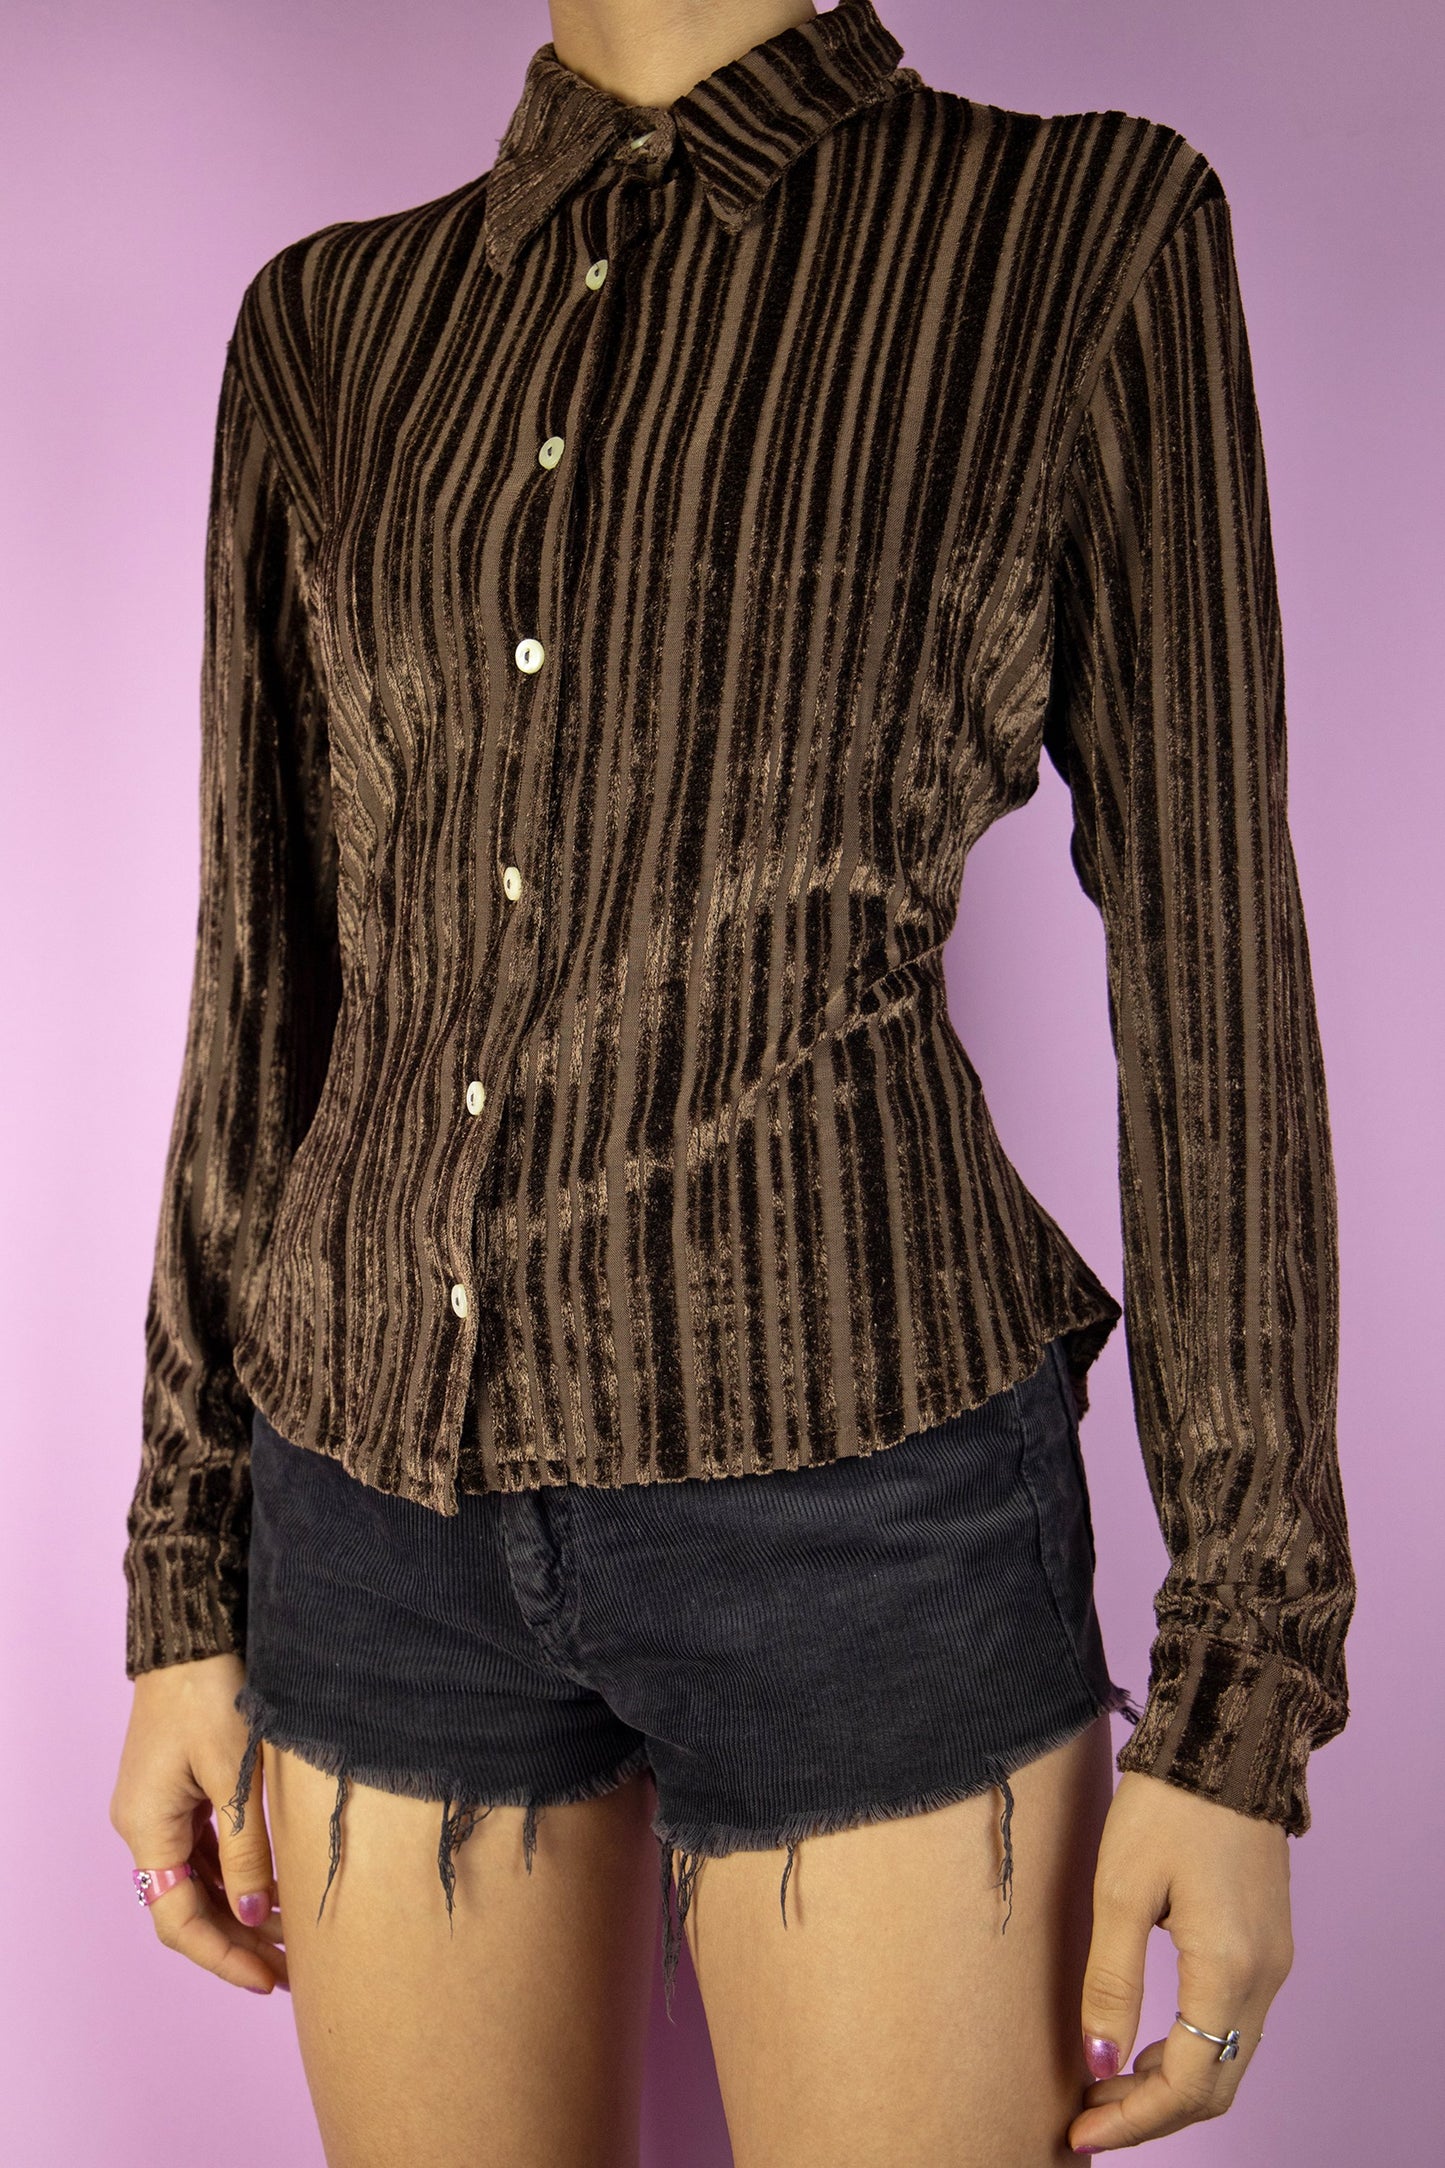 The Vintage 90's Brown Velvet Shirt is a striped stretch dark brown velvet top. This cute boho grunge dark academia blouse is from the 1990s.